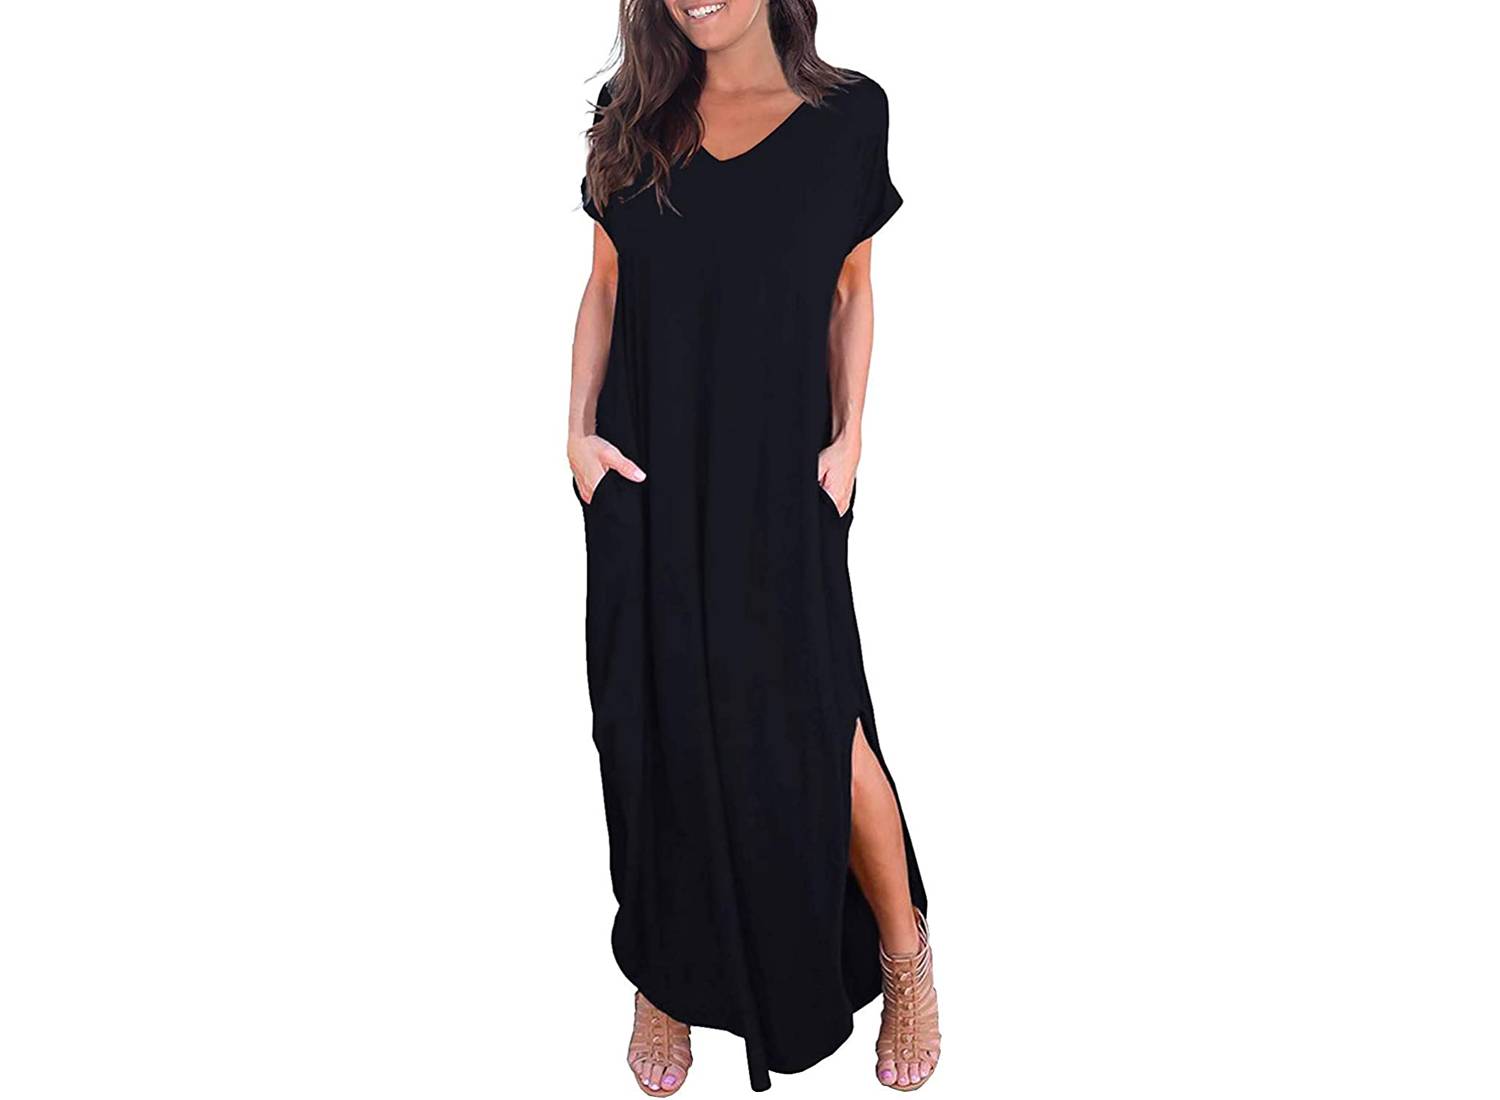 Woman wearing a black loose-fitting short sleeve maxi dress with sandals